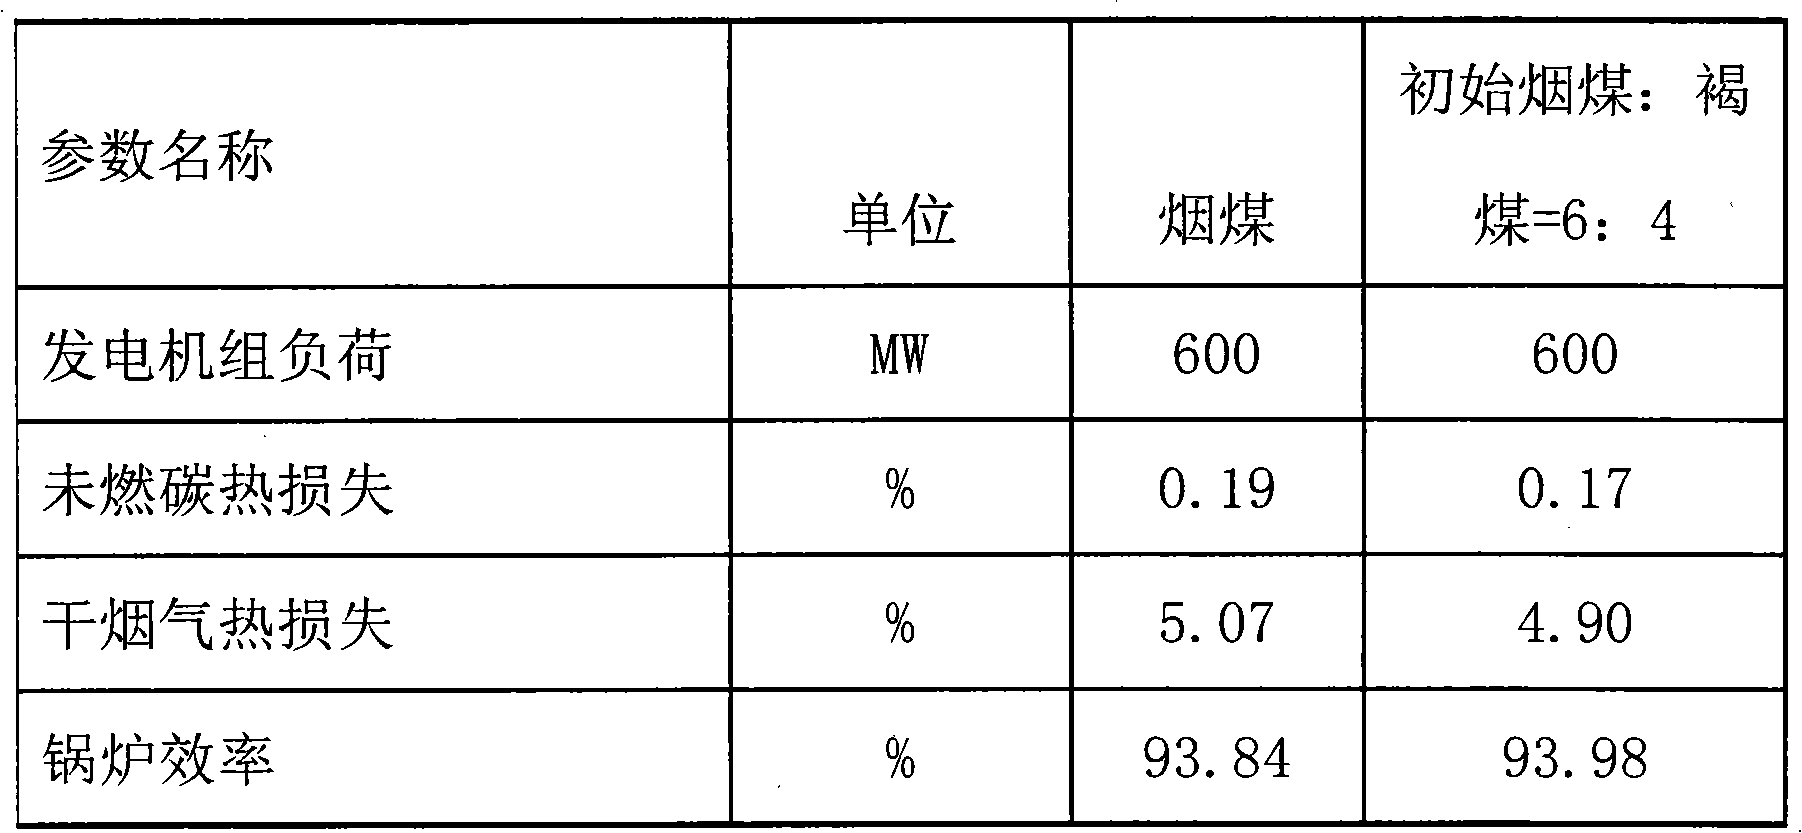 Method for mixedly burning brown coal by using drying margin of mid-speed grinding mill